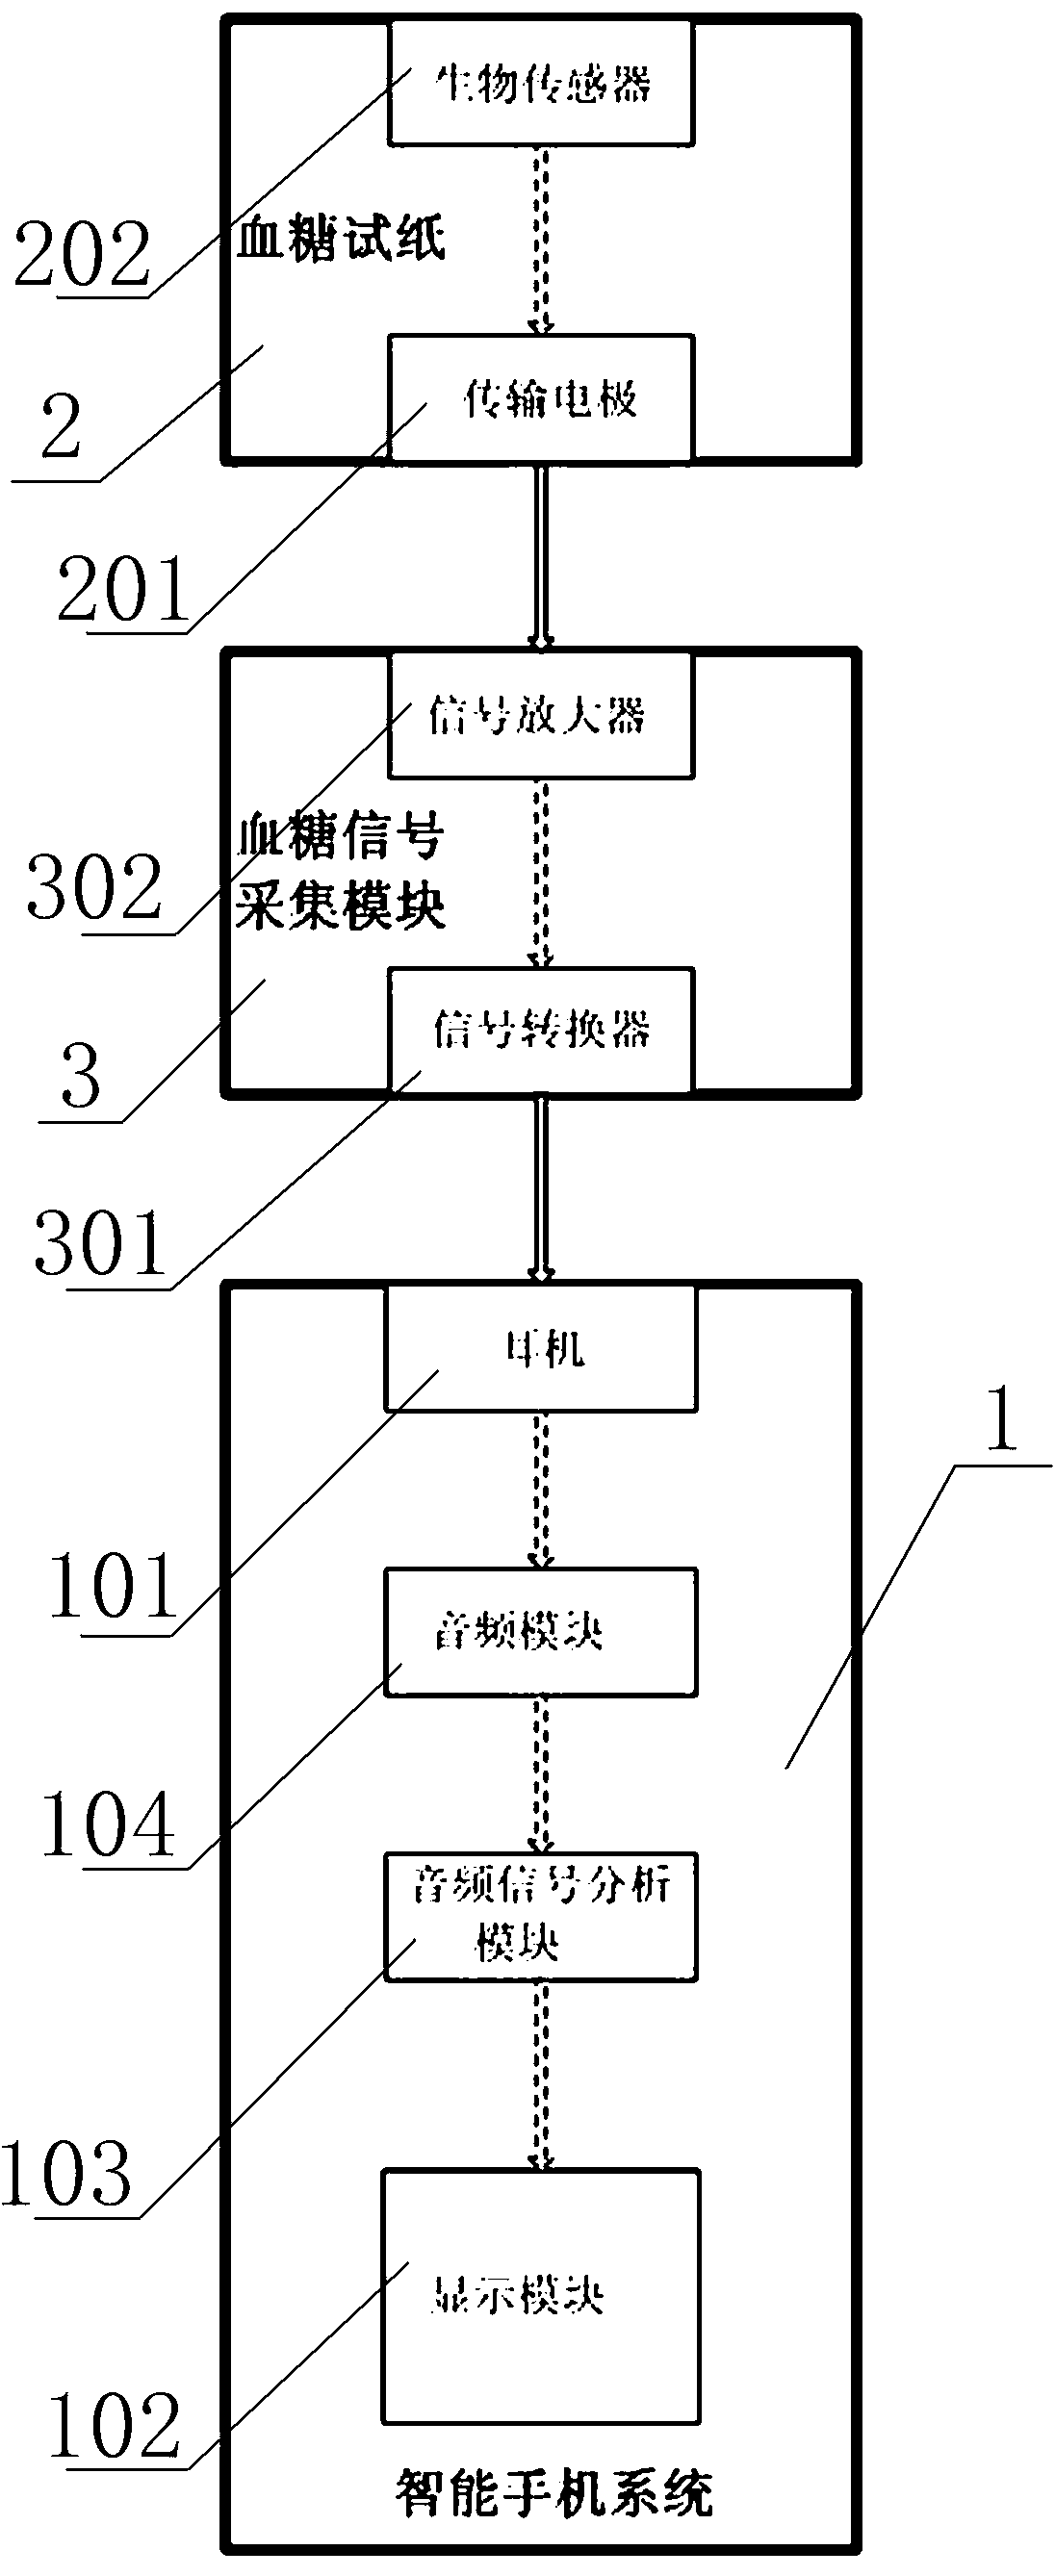 Blood glucose monitoring device based on smart phone, and realization method thereof